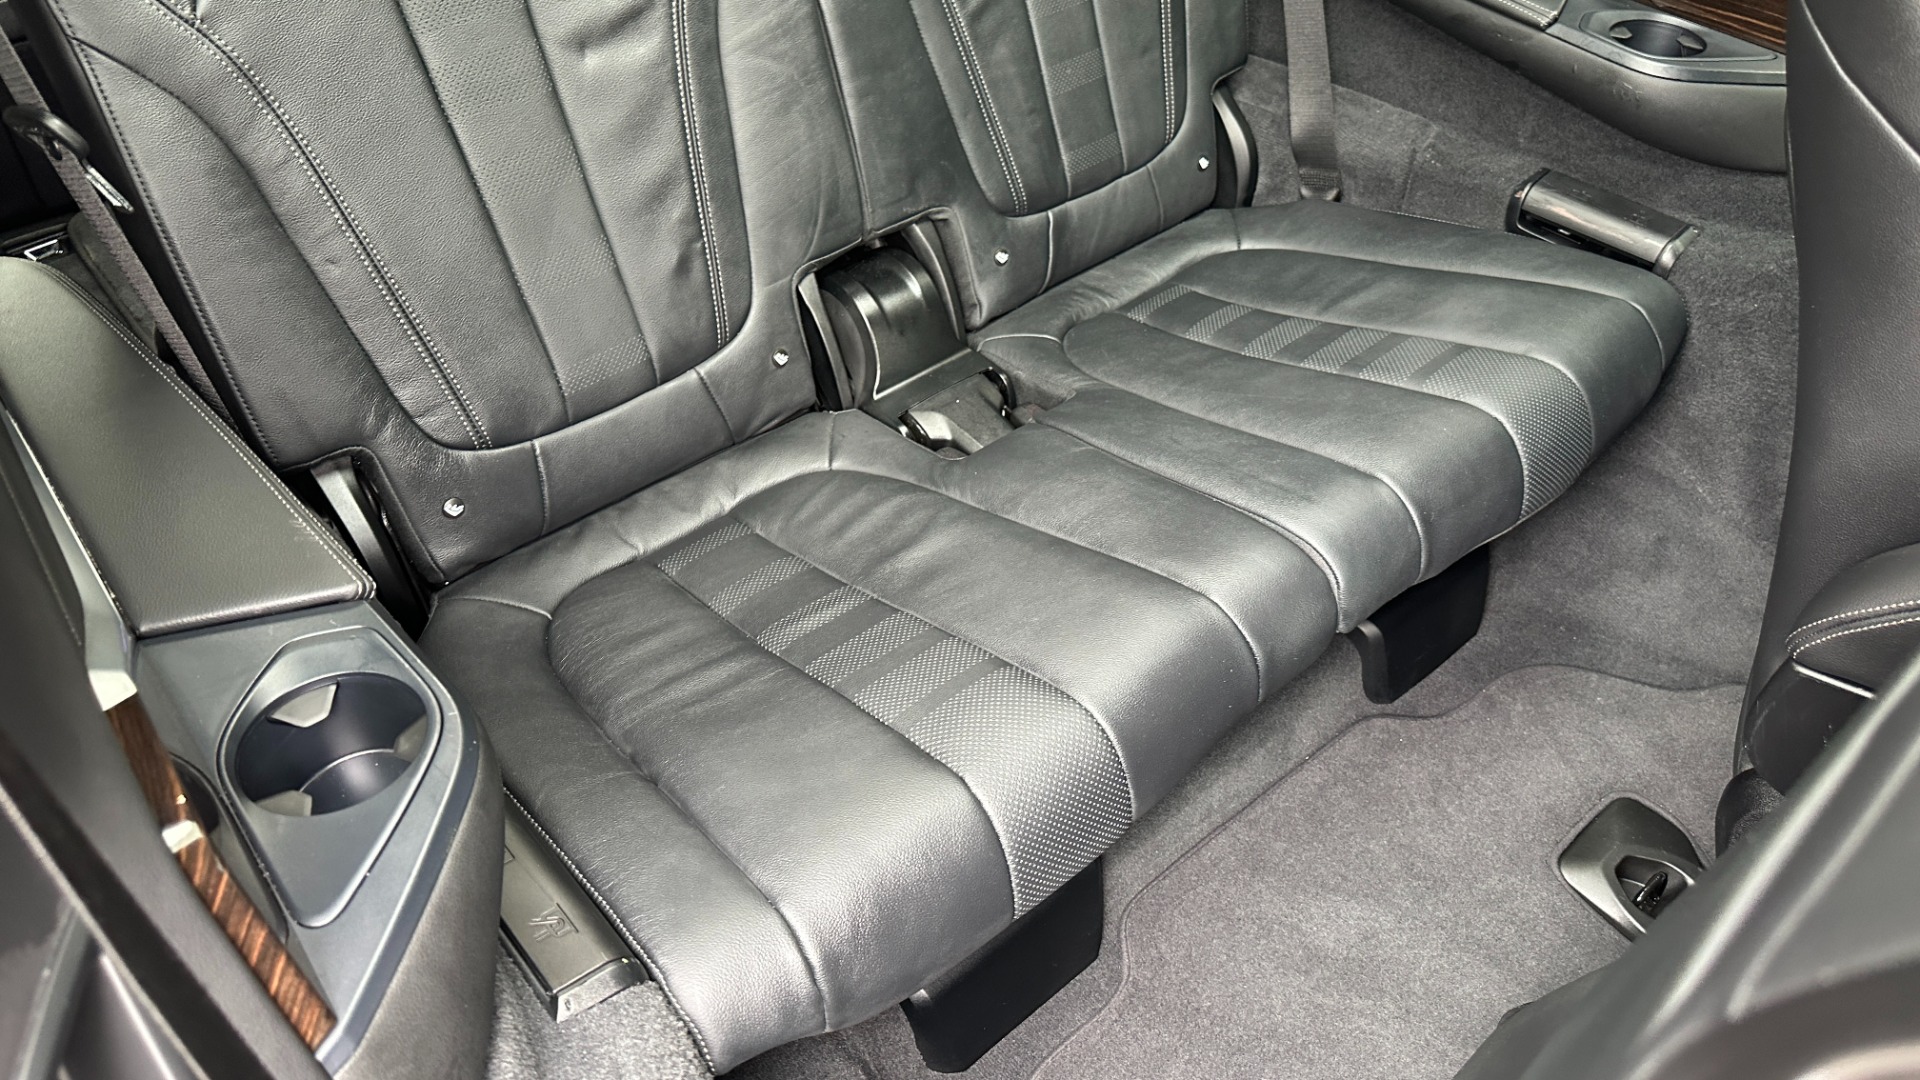 Used 2020 BMW X7 xDrive40i / 22IN WHEELS / CAPTAIN CHAIRS / M SPORT / PREMIUM PKG for sale $59,995 at Formula Imports in Charlotte NC 28227 31